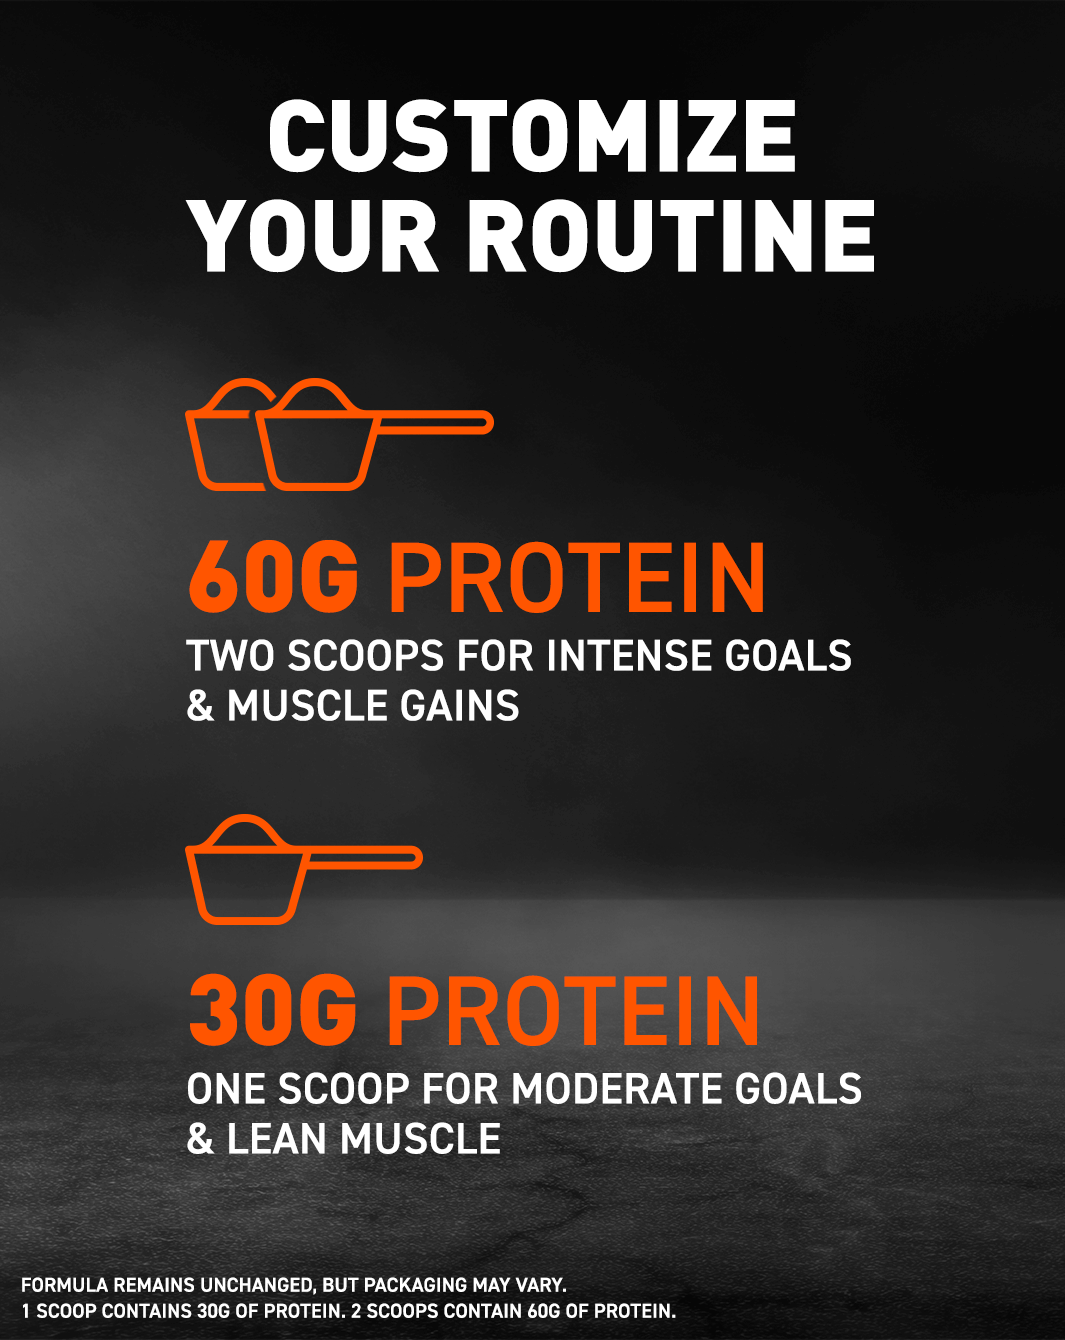 Super Advanced Isolate Protein Powder, Vanilla; ; Customize your routine; 60G Protein - 2 scoops for the intense goals & muscle gains; 30G - 1 scoops for the intense goals & muscle gains; Formula remains unchanged, but packaging may vary. 1 scoop contains 30G of protein. 2 scoops contain 60G of protein.